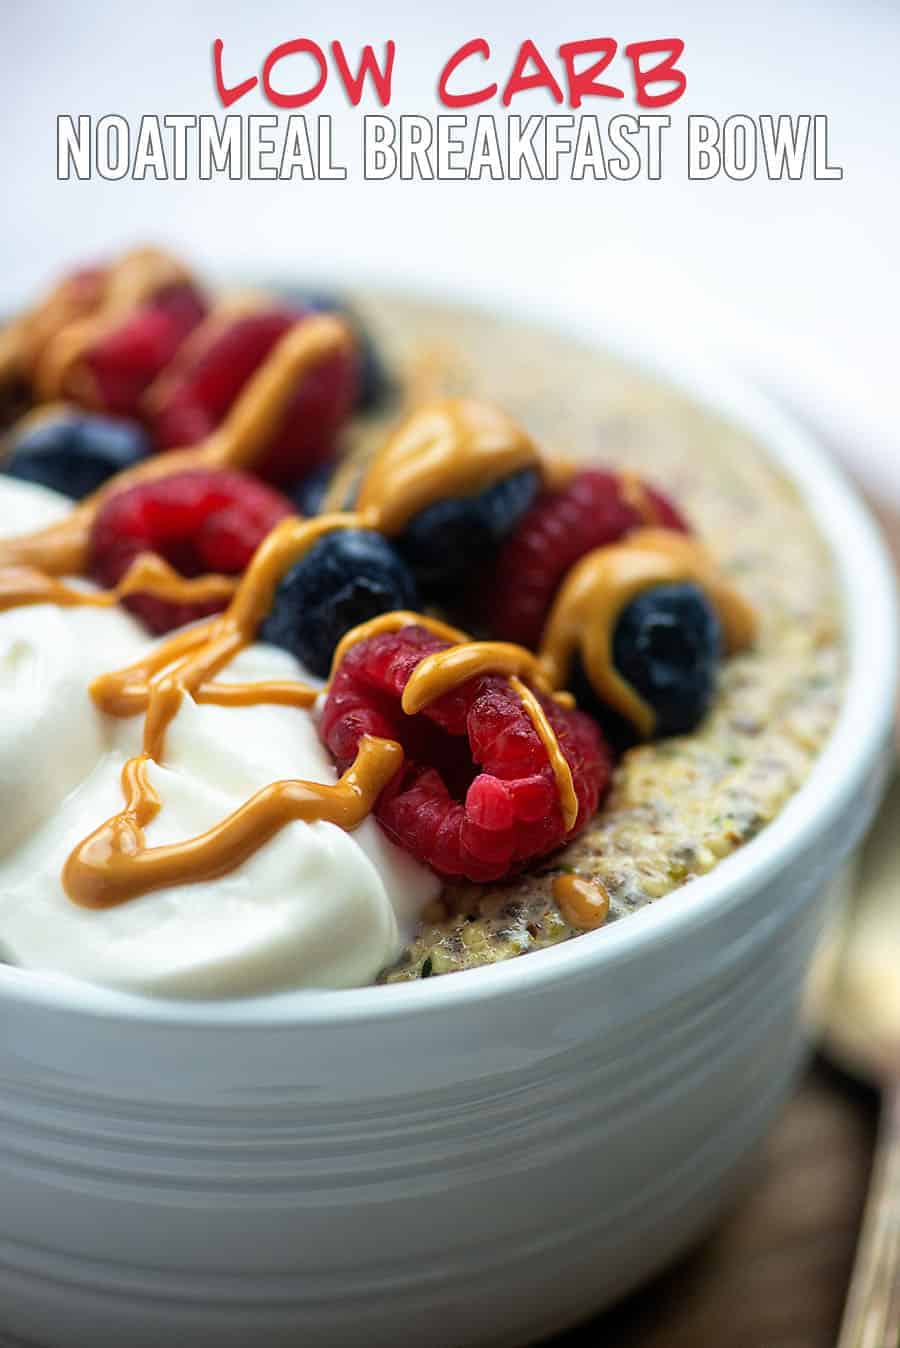 Keto Oatmeal made with hemp hearts, chia seeds, and flax instead of oats! This makes a hearty, filling breakfast and it's perfect for keto!